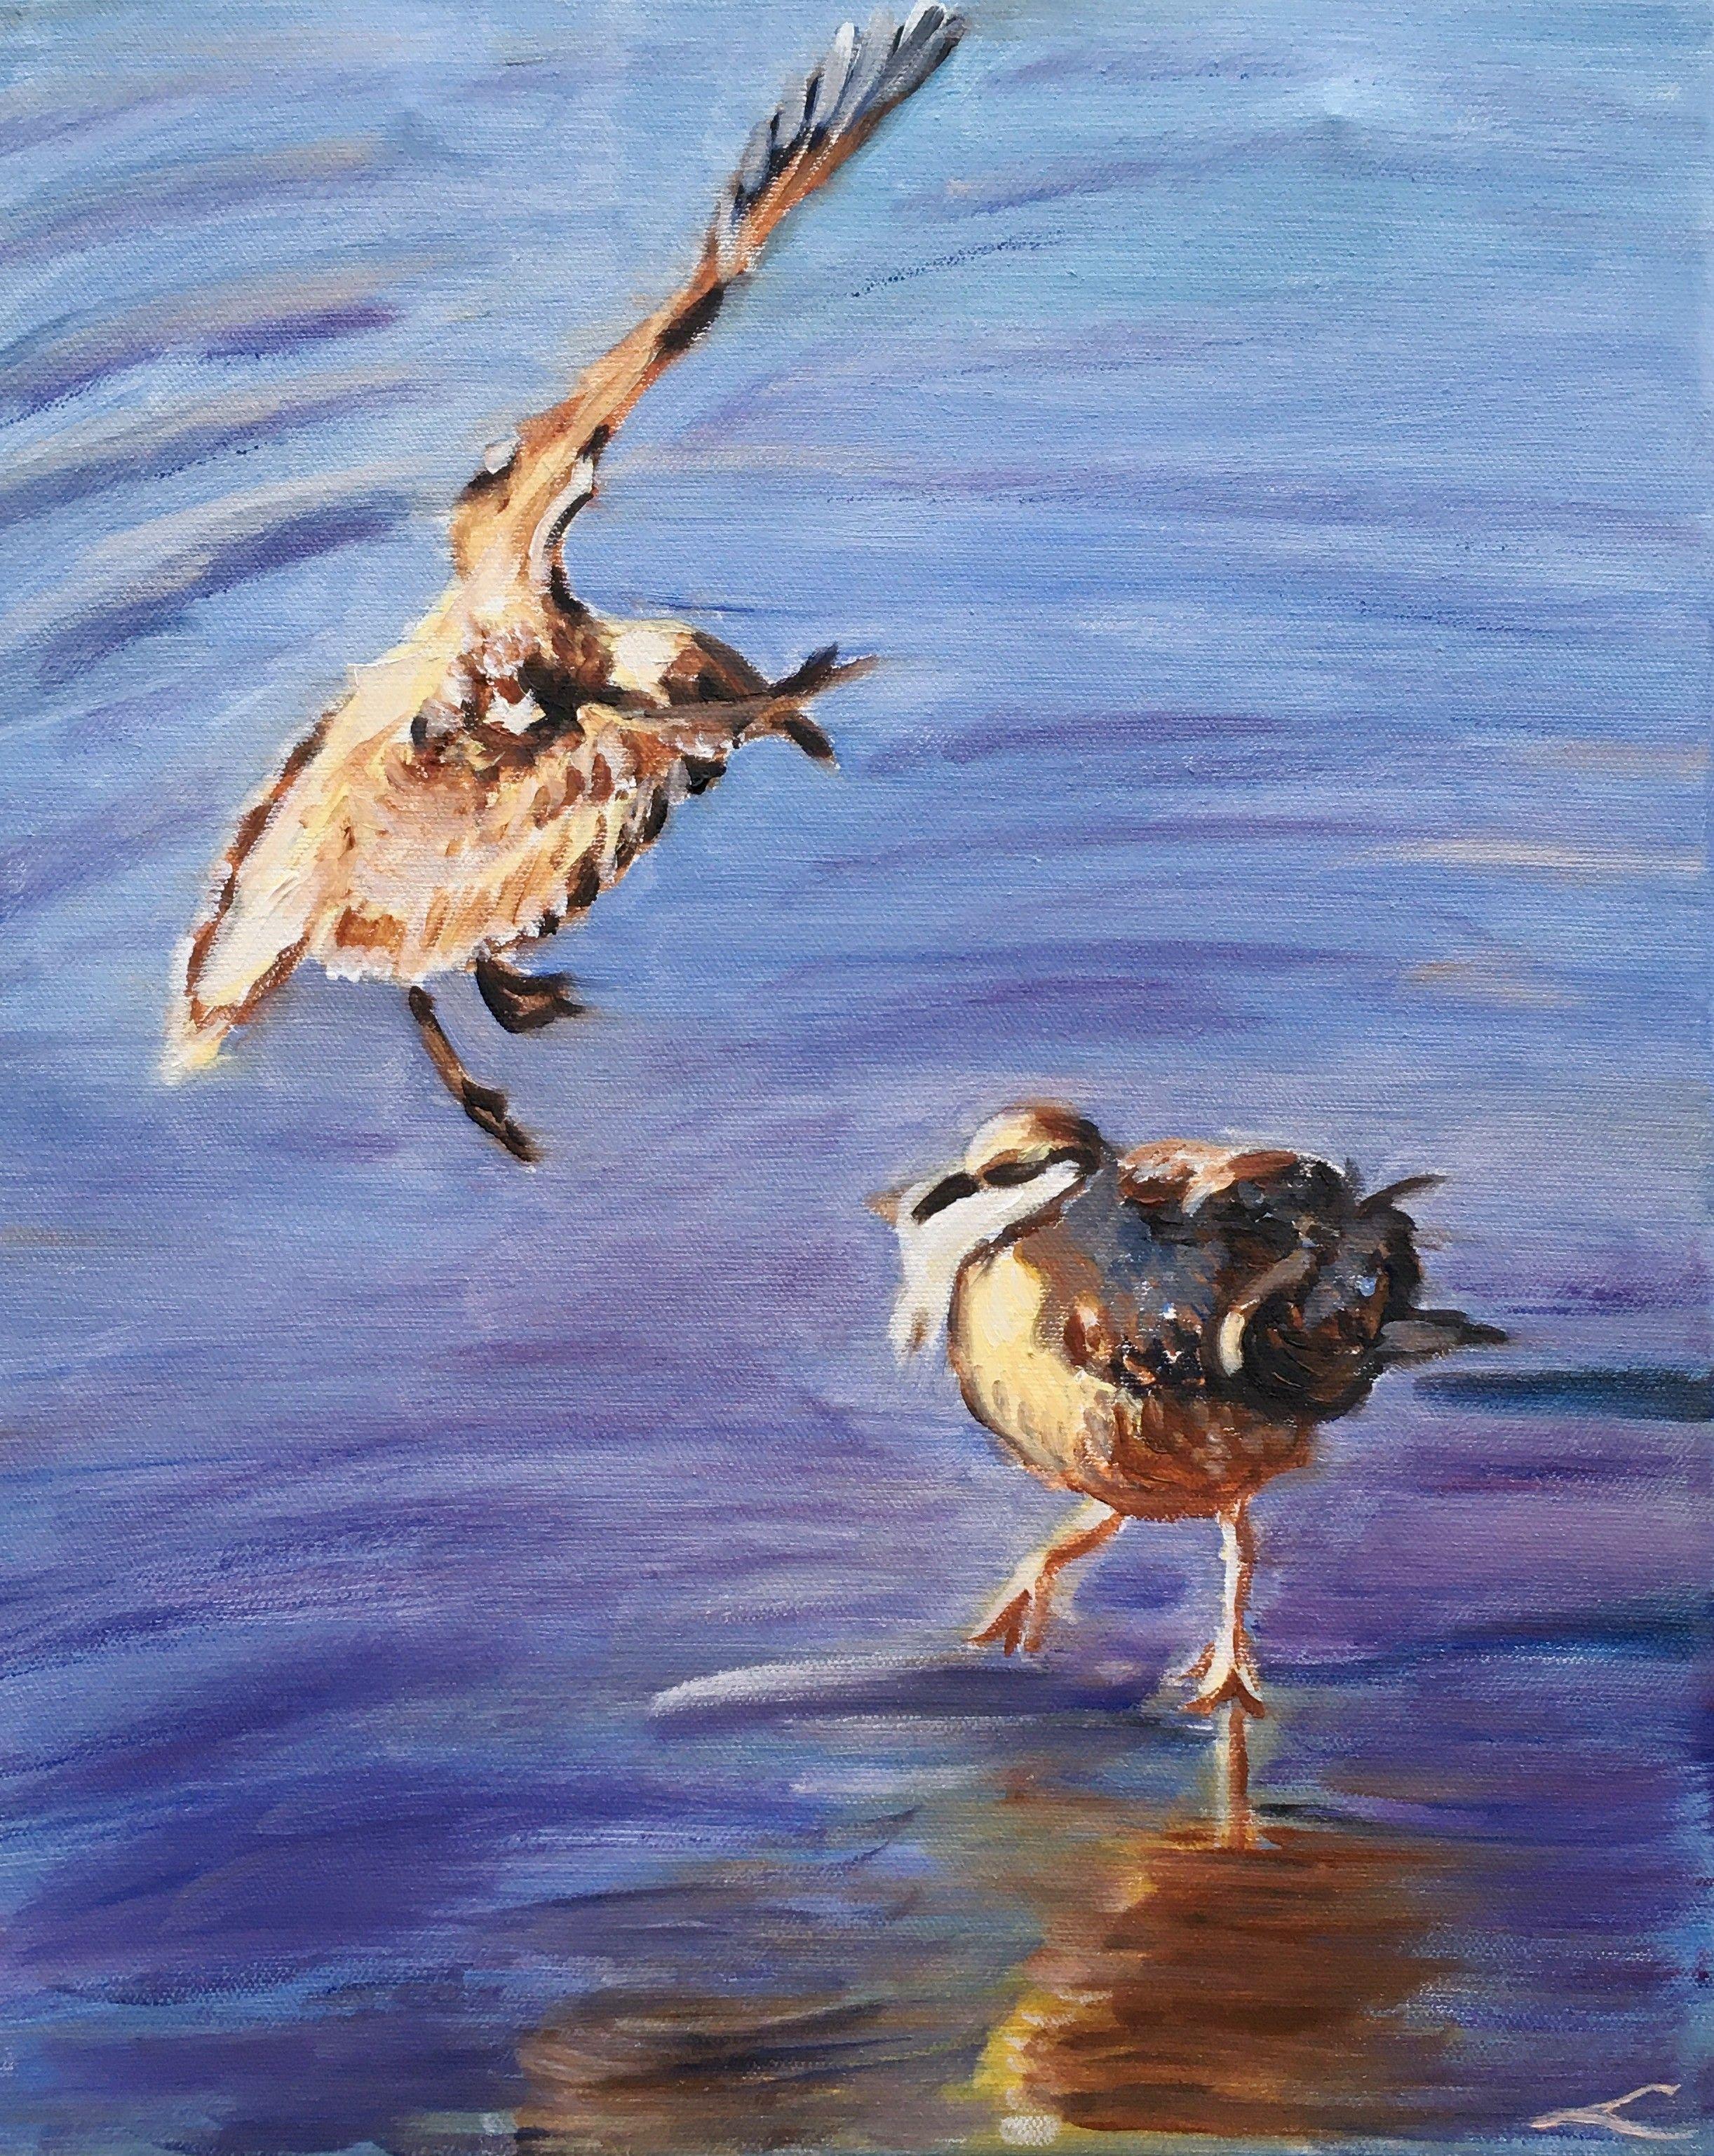 Two seagulls figting for the fish. Alla prima oil painting with few final tuches when dry. Beach Paintings always inspire thoughts of holidays, long walks, warm breezes and relaxation. beach and ocean themed paintings that will bring the outdoors